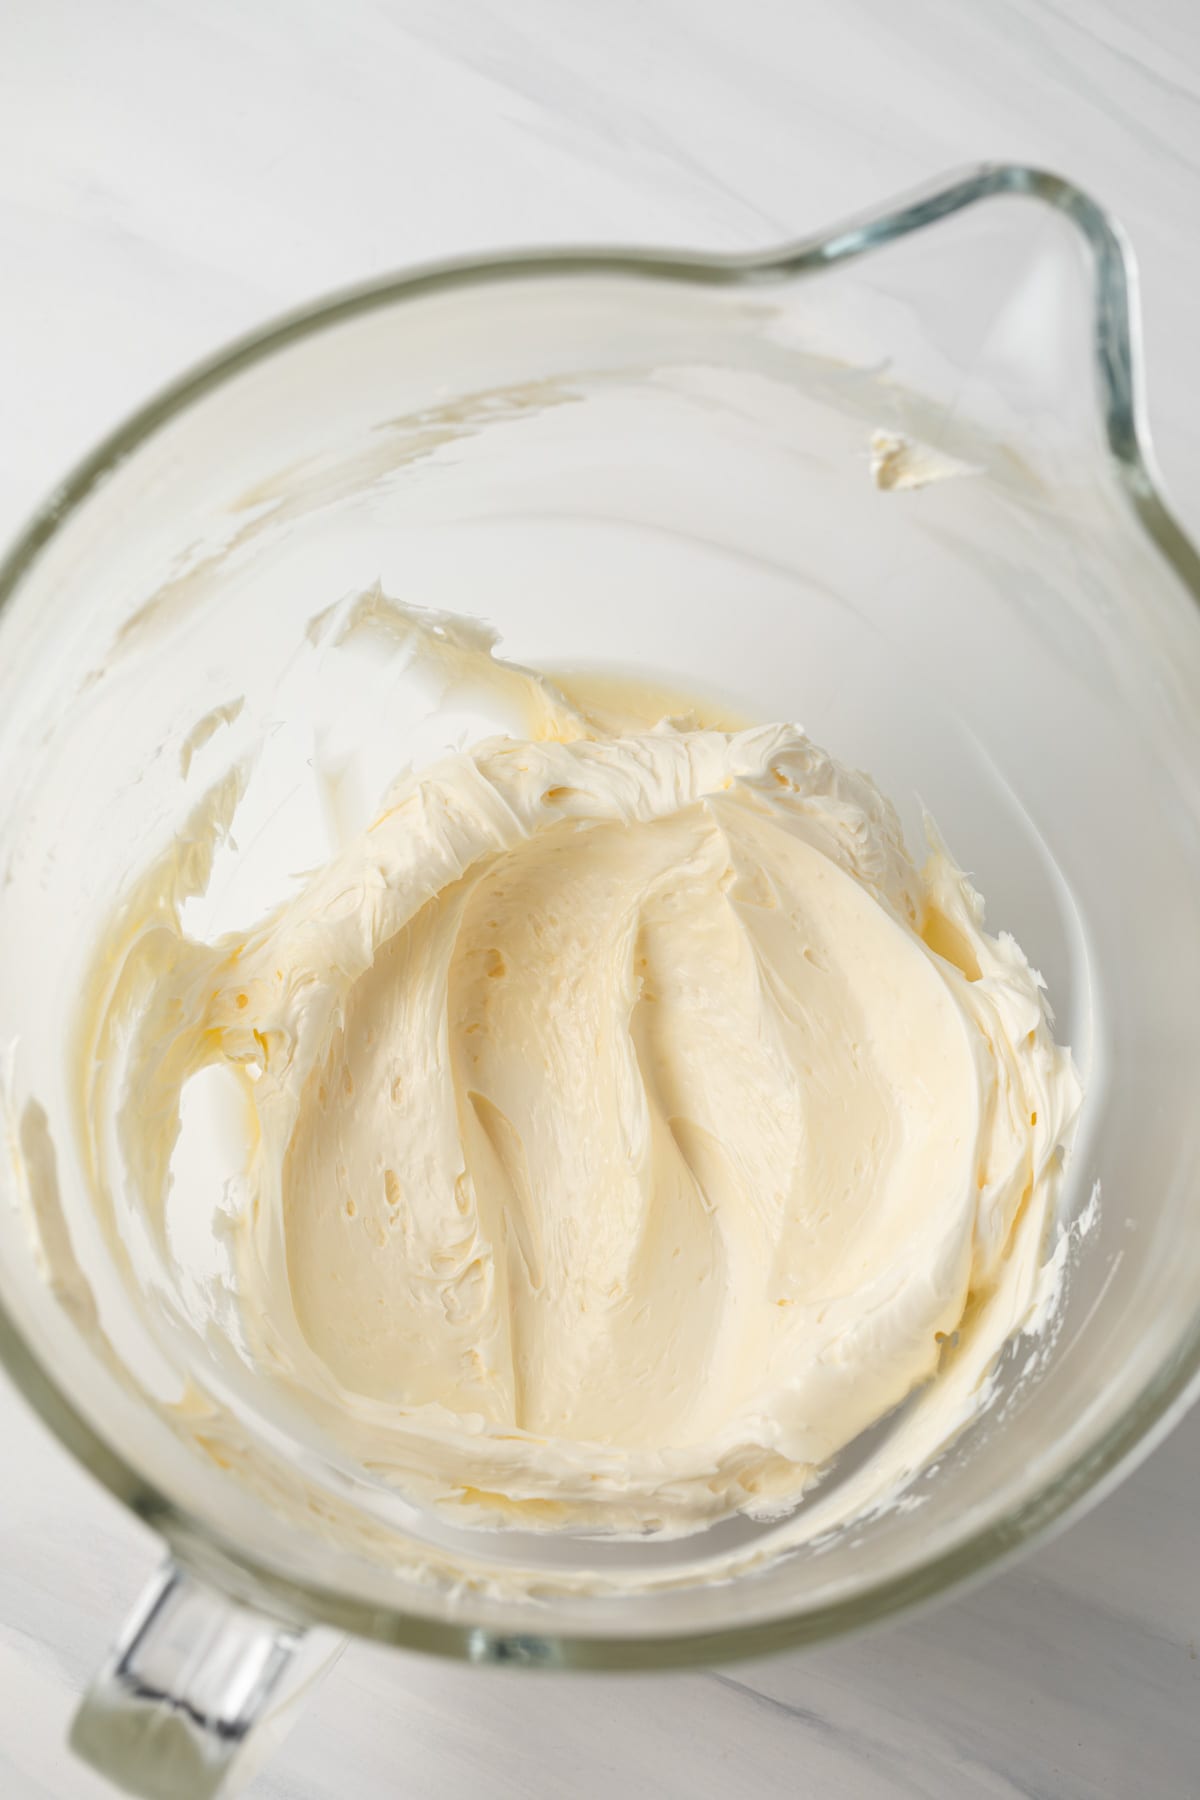 Creamed butter in a glass bowl.